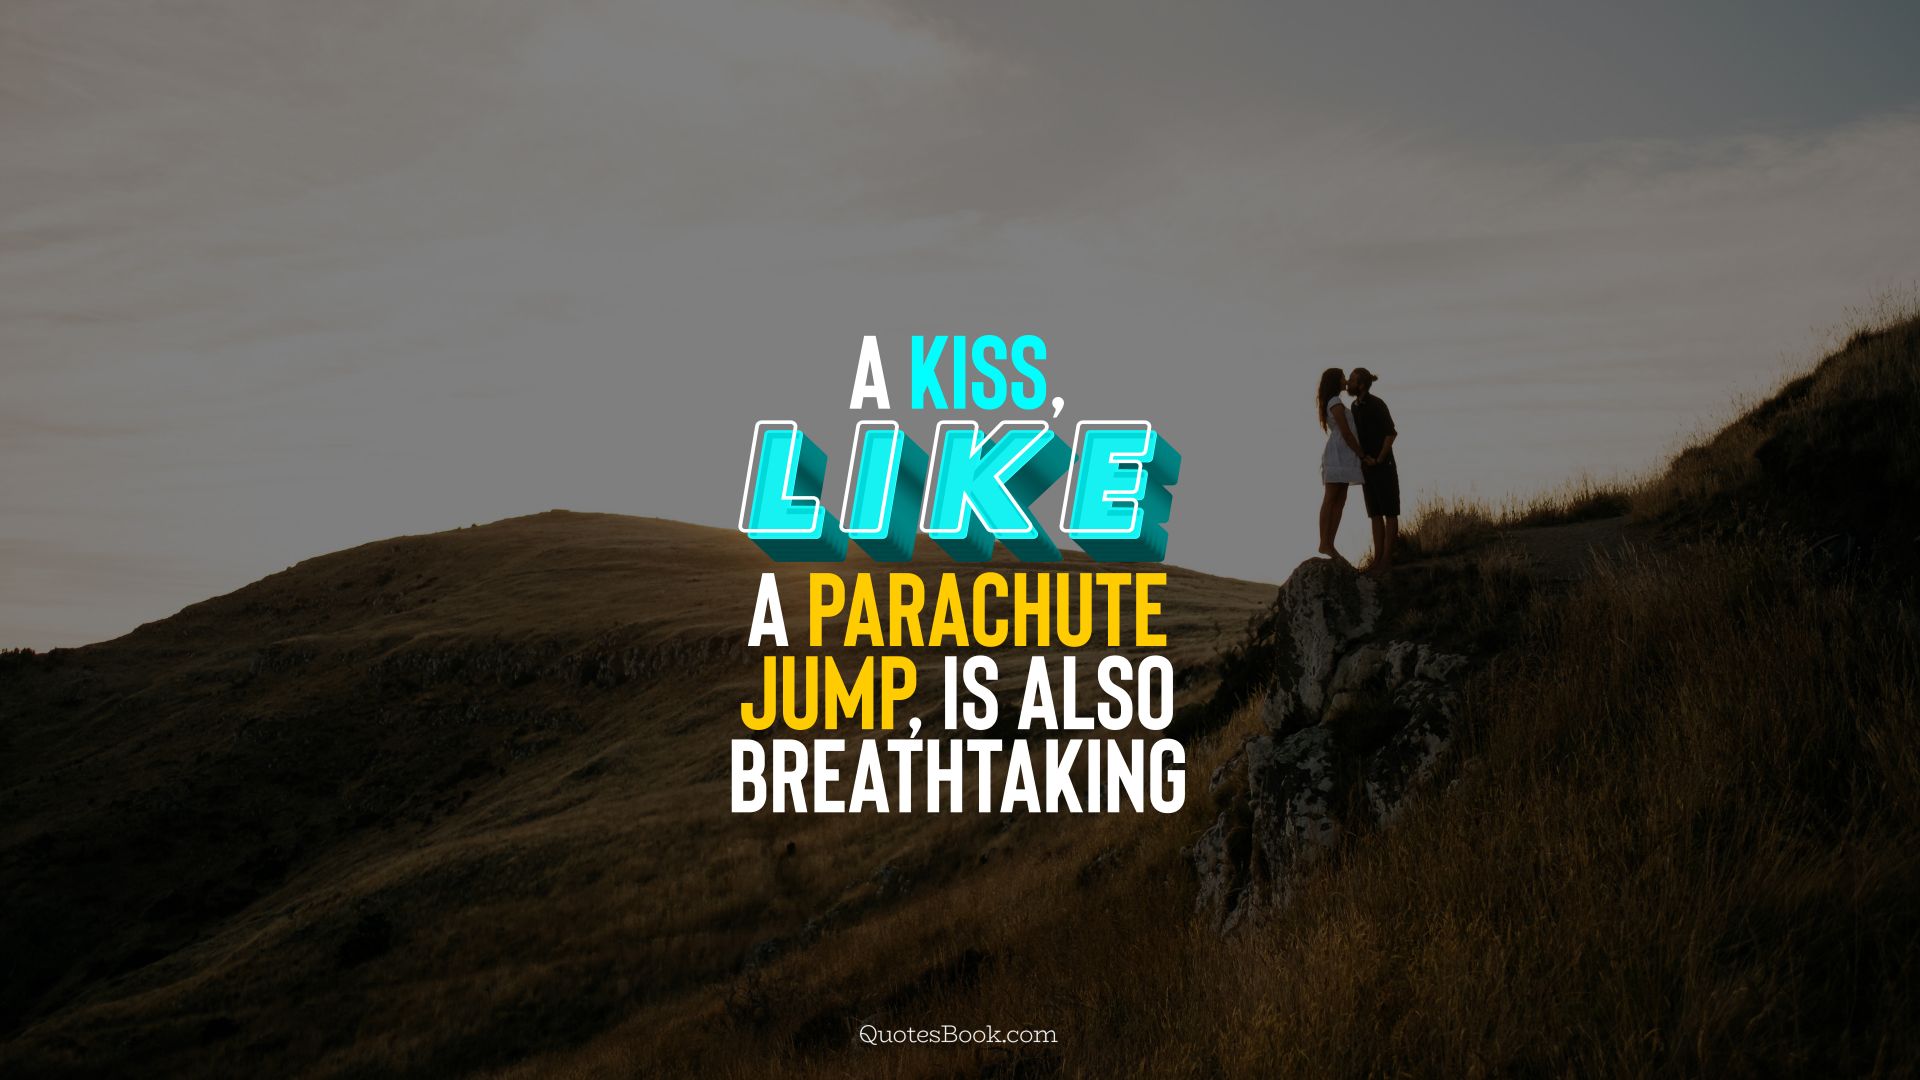 A kiss, like a parachute jump, is also breathtaking. - Quote by QuotesBook